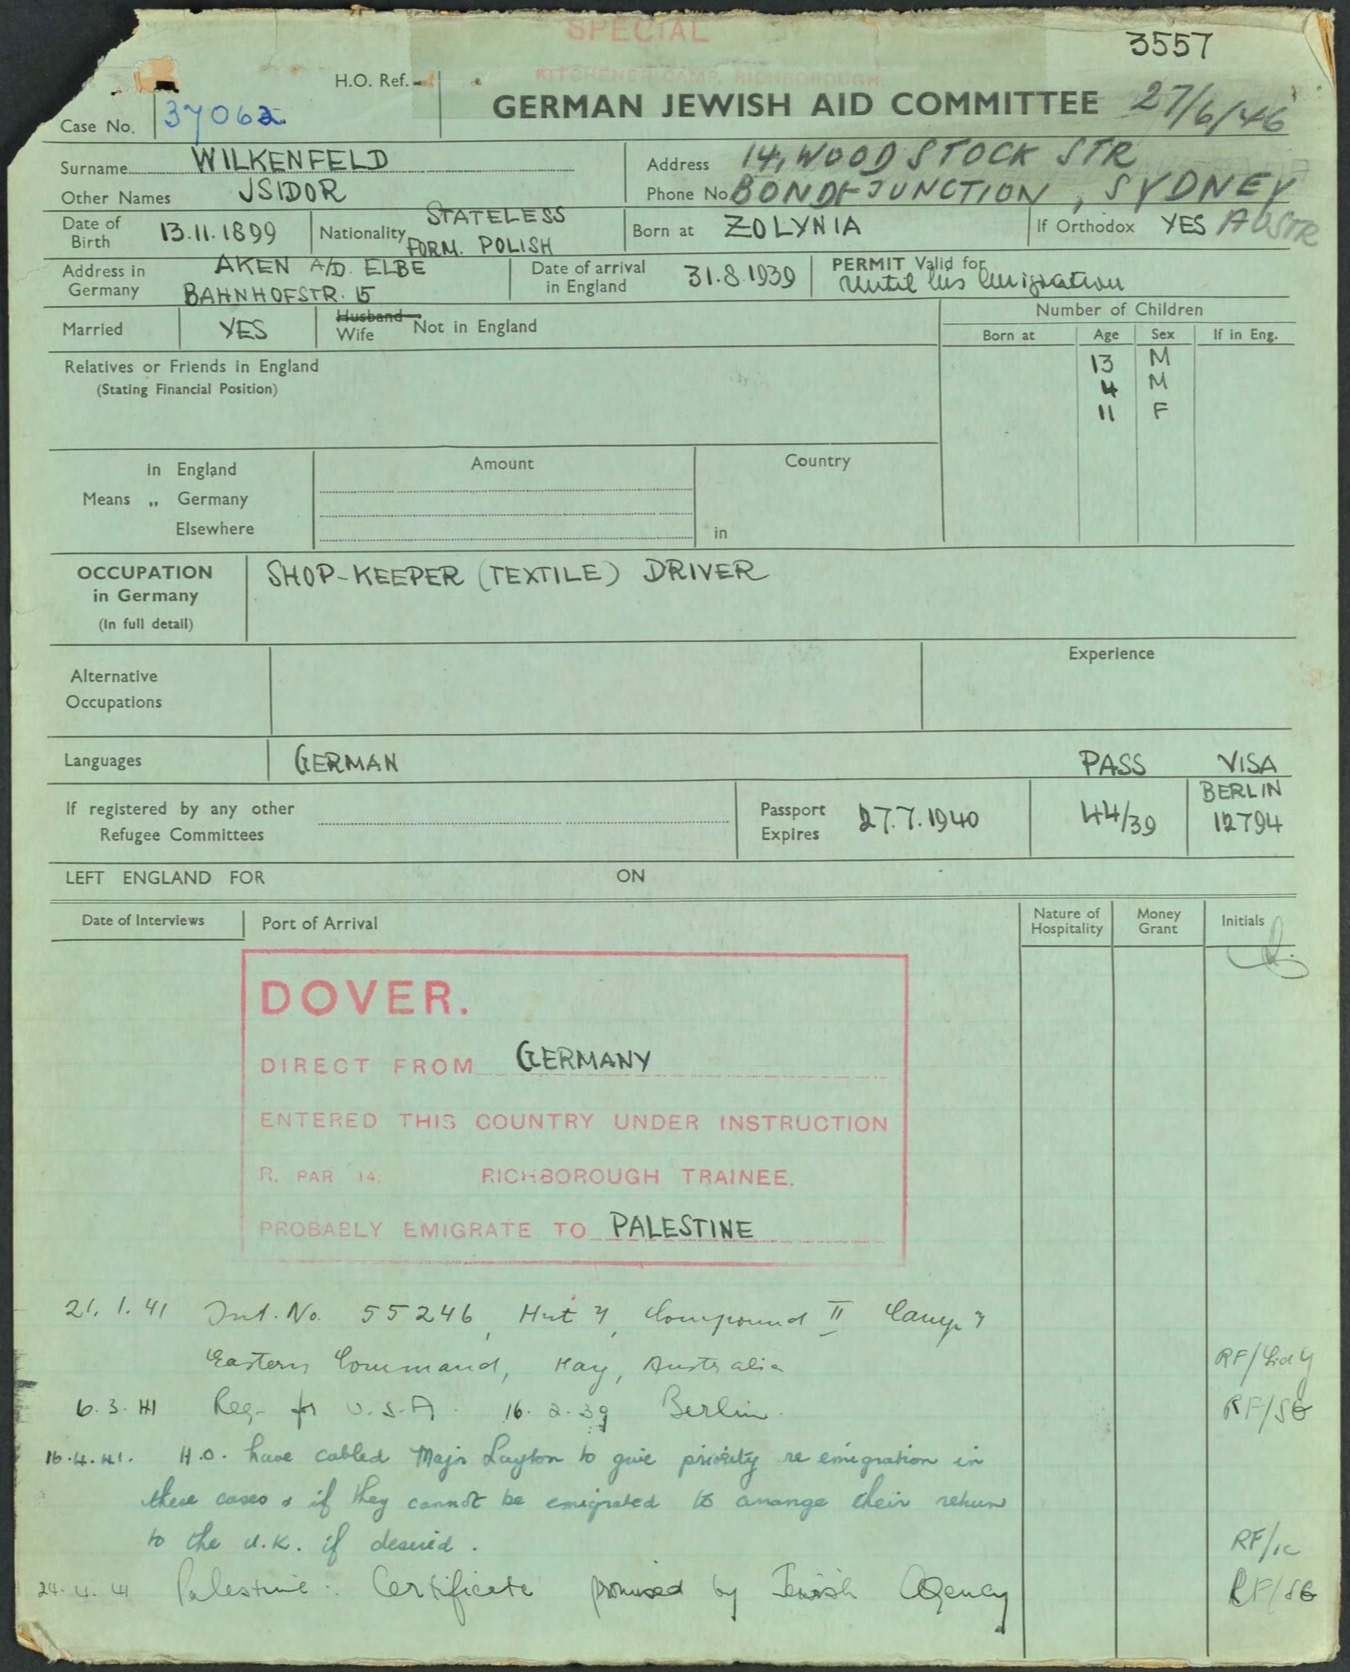 Kitchener camp, Isidor Wilkenfeld, World Jewish Relief forms, page 1, Shop keeper, textile driver, Probably emigrate to Palestine, Major Layton, Date of arrival in Britain 31 August 1939, permit valid until his emigration